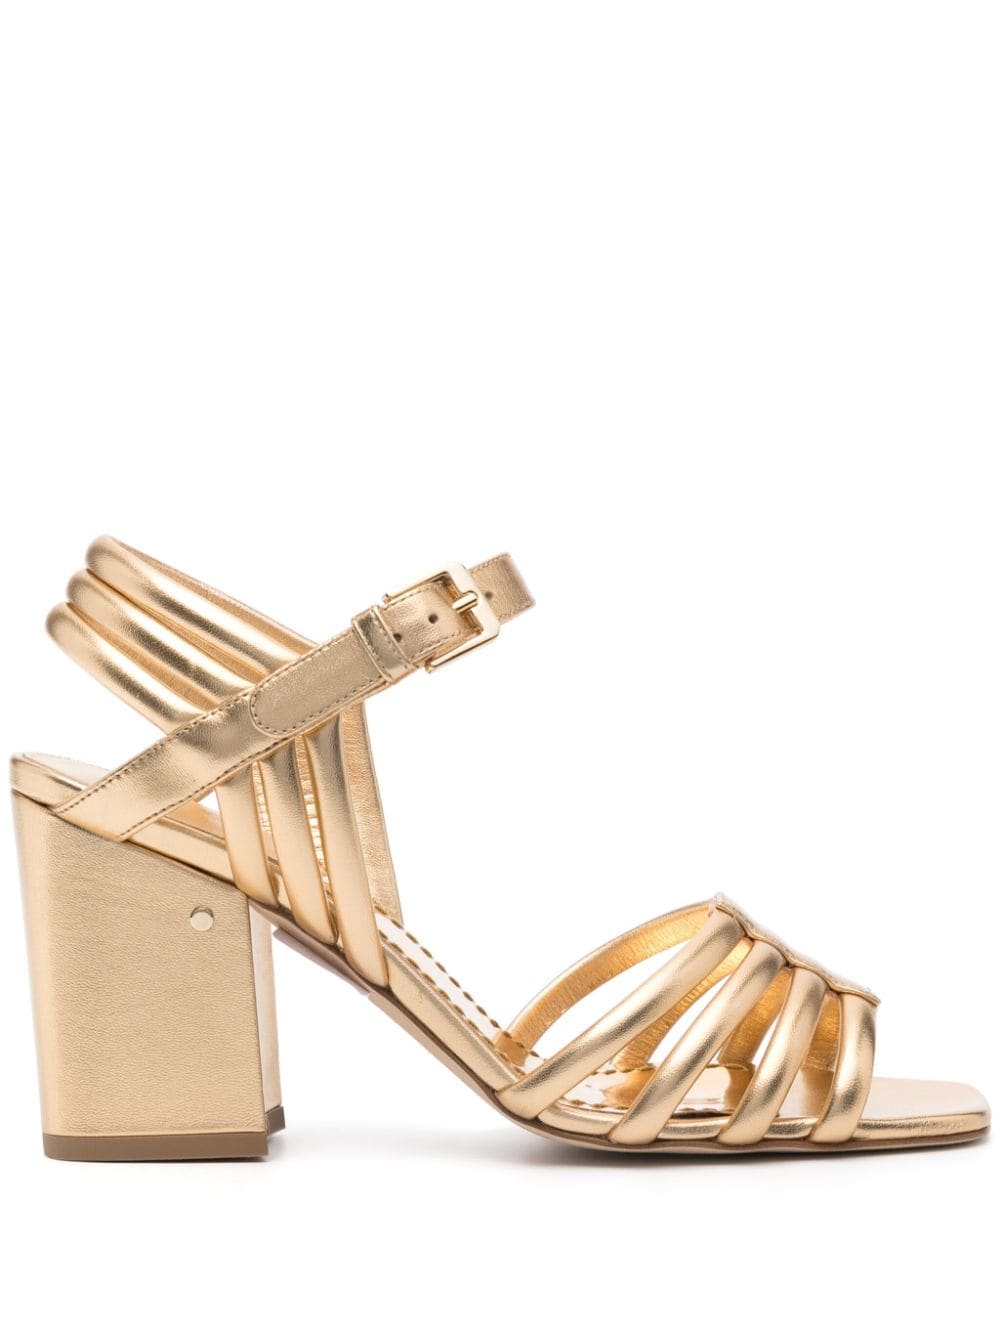 Laurence Dacade Camila 85mm leather sandals - Gold von Laurence Dacade